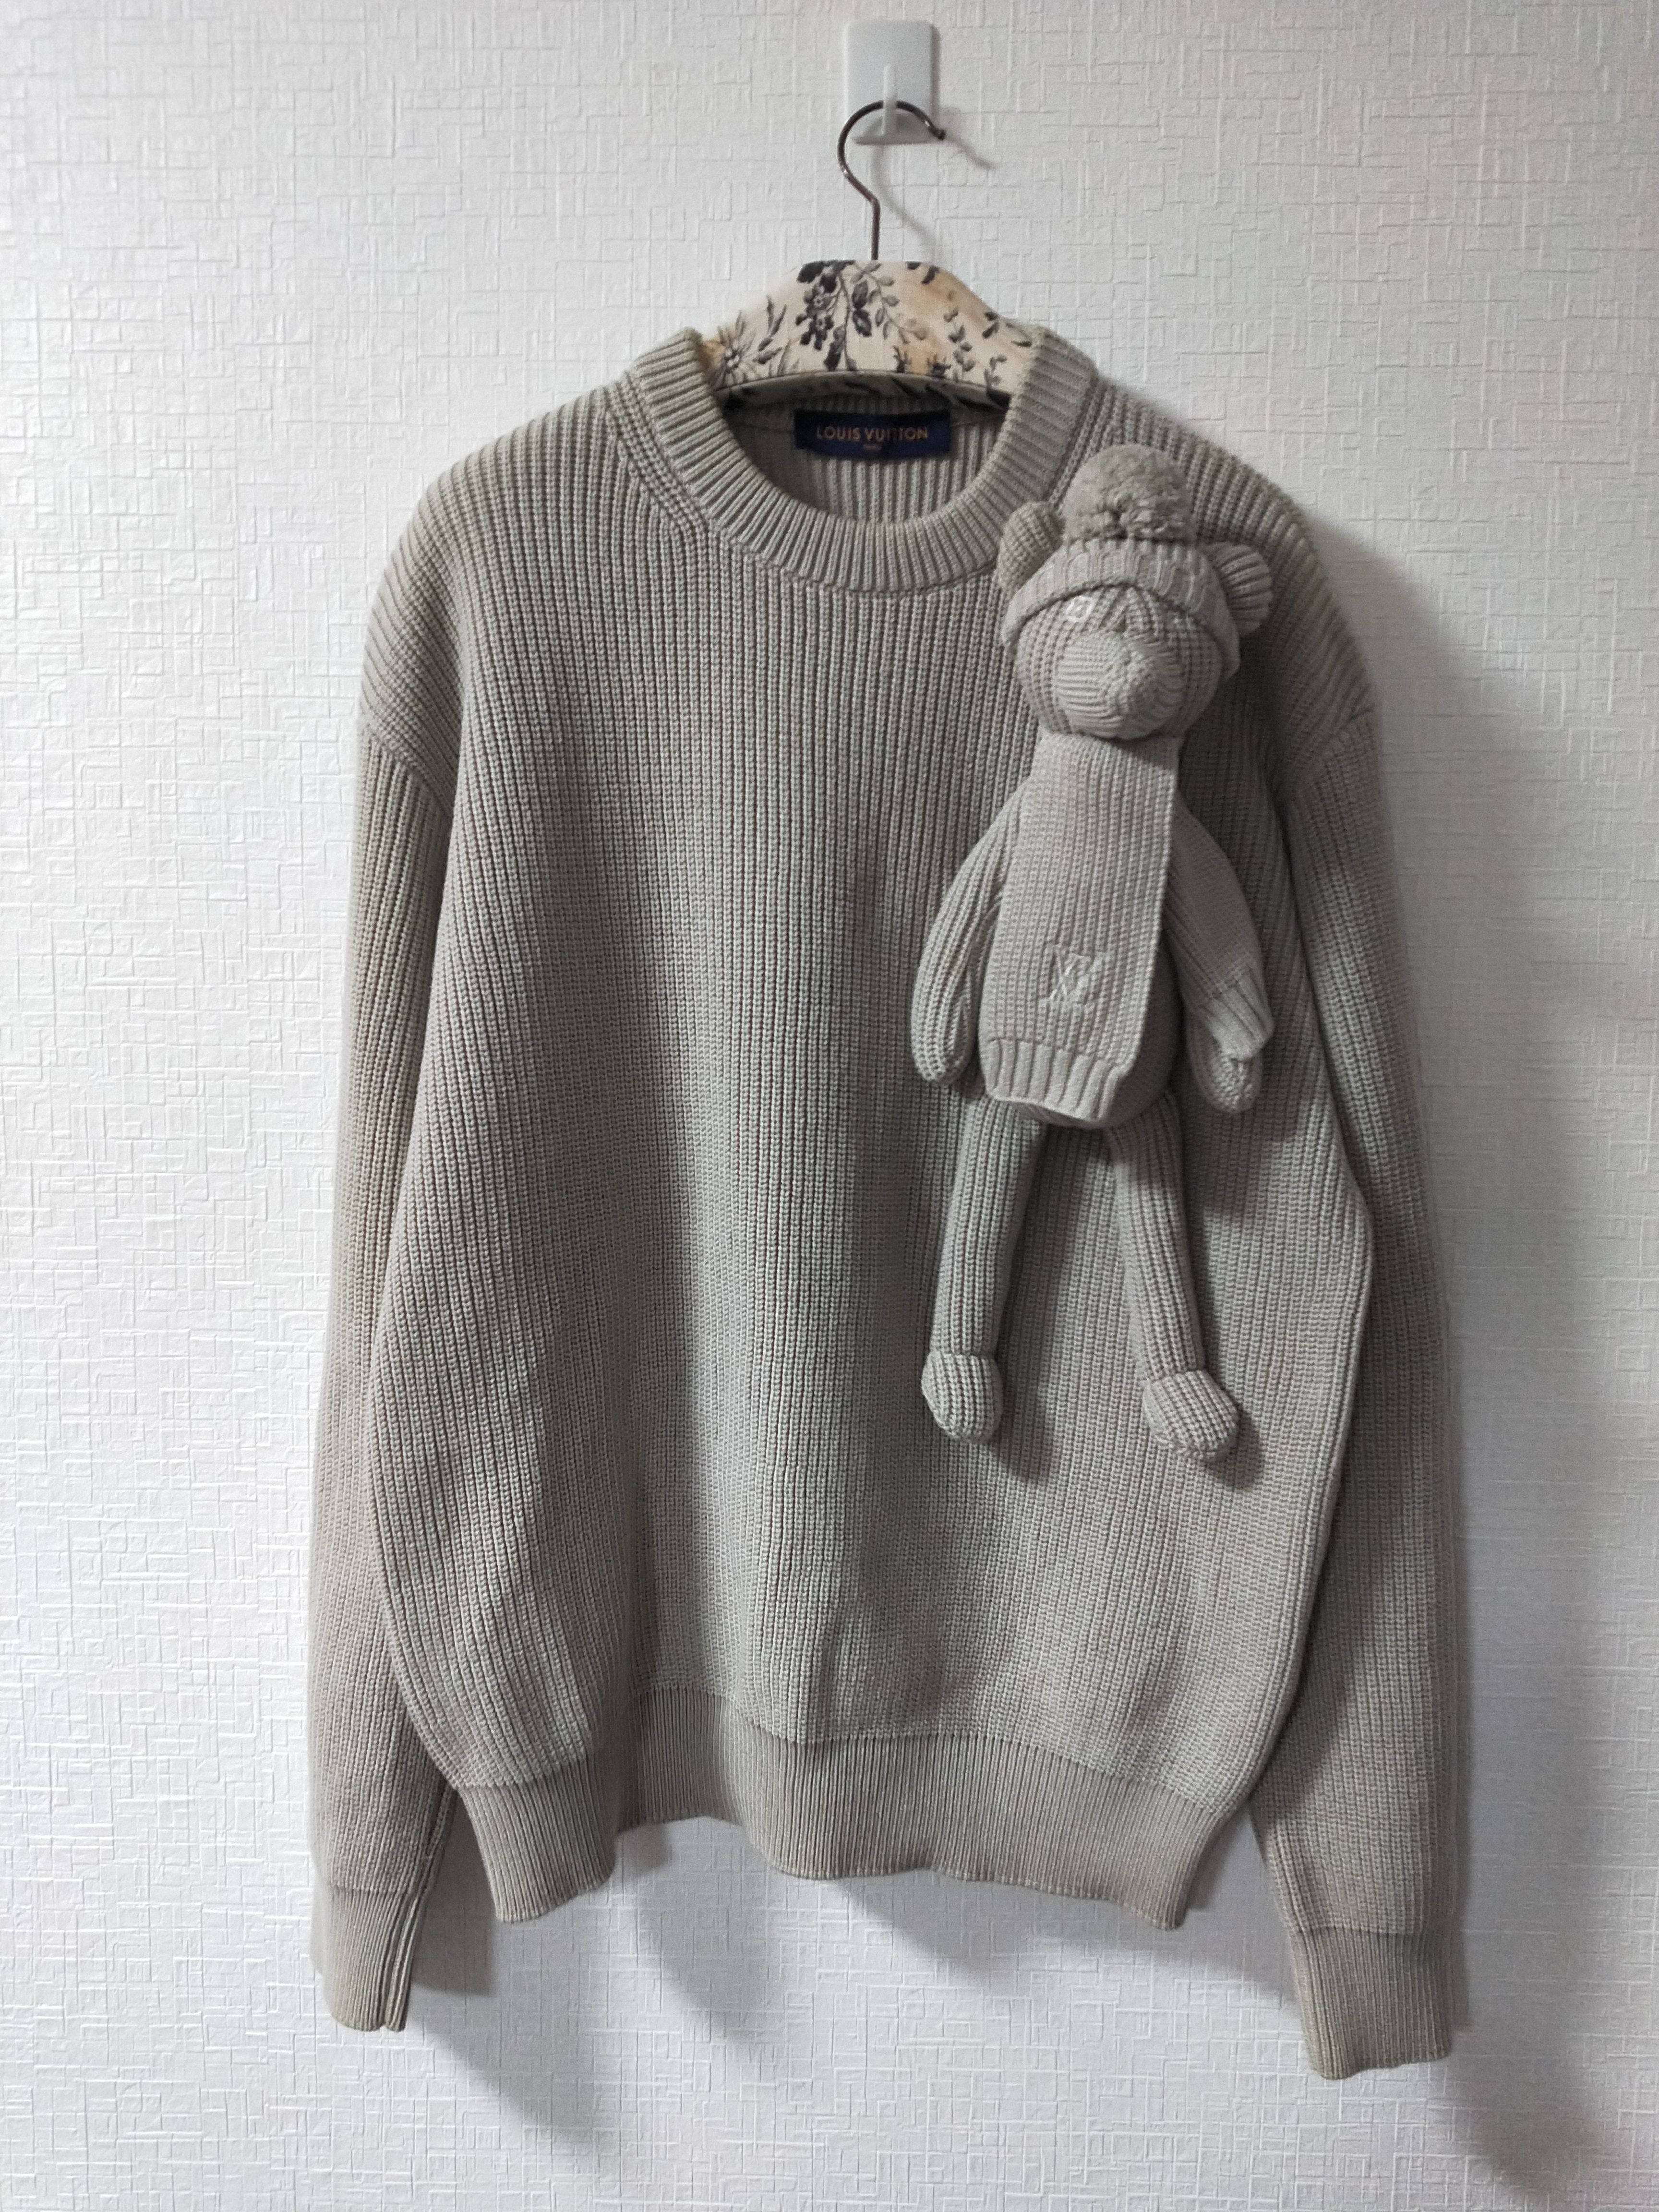 LOUIS VUITTON 3d Knitted Set Grey Cashmere Knitted. Size 3 Months